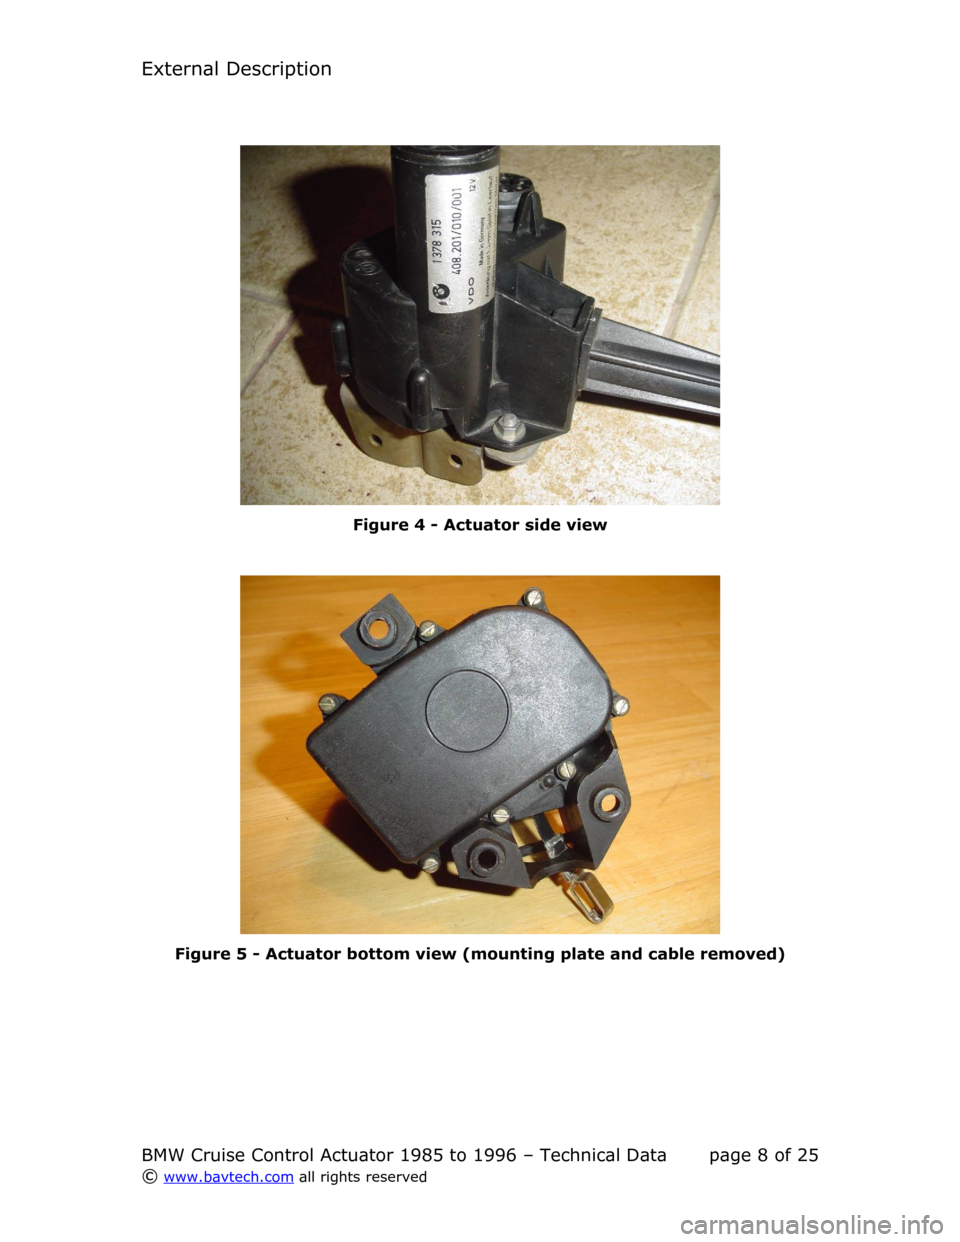 BMW 7 SERIES 1991 E32 Cruise Control Acutator External Description
Figure  4  - Actuator side view
Figure  5  - Actuator bottom view (mounting plate and cable removed)
BMW Cruise Control Actuator 1985 to 1996 – Technical Data page  8  of  25
©